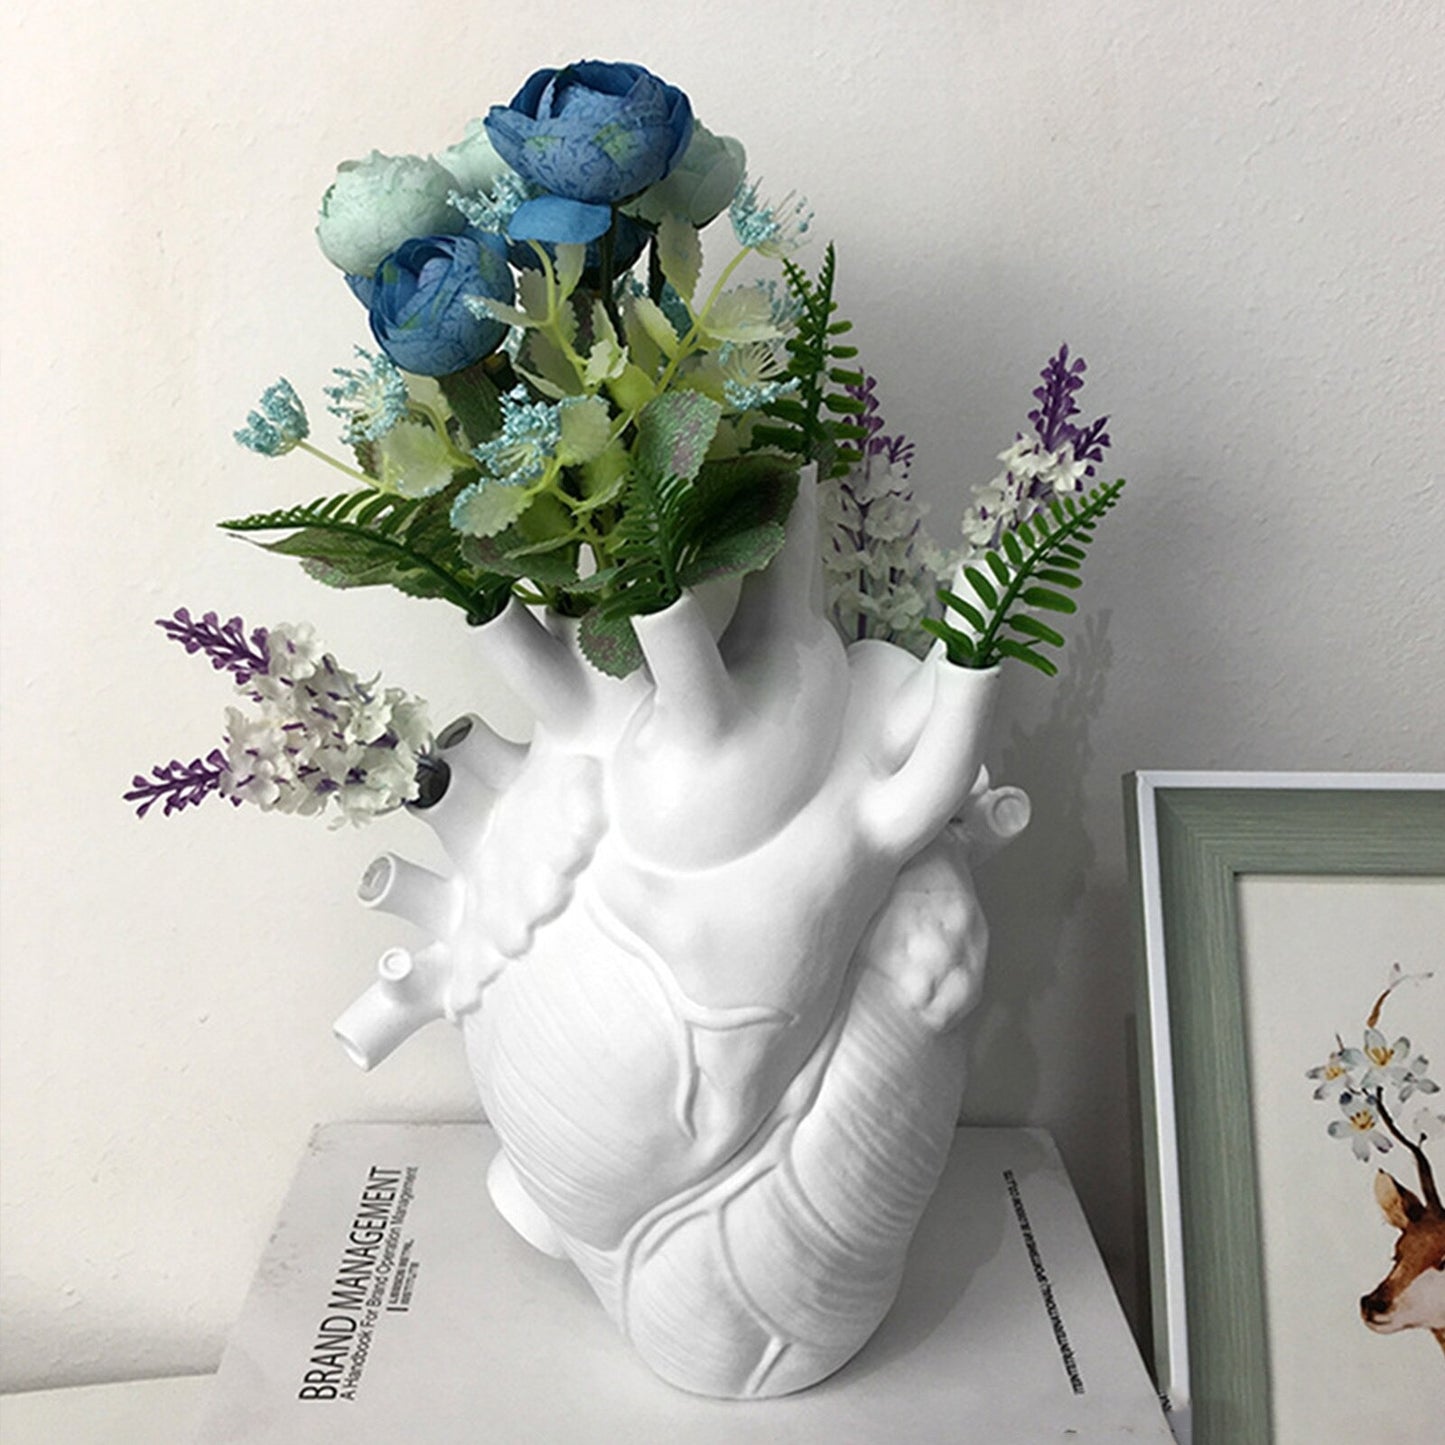 A white human heart shaped vase complete with arteries. The holes of the arteries are filled with various colored purple flowers and leaves. The vase is displayed resting on a book.